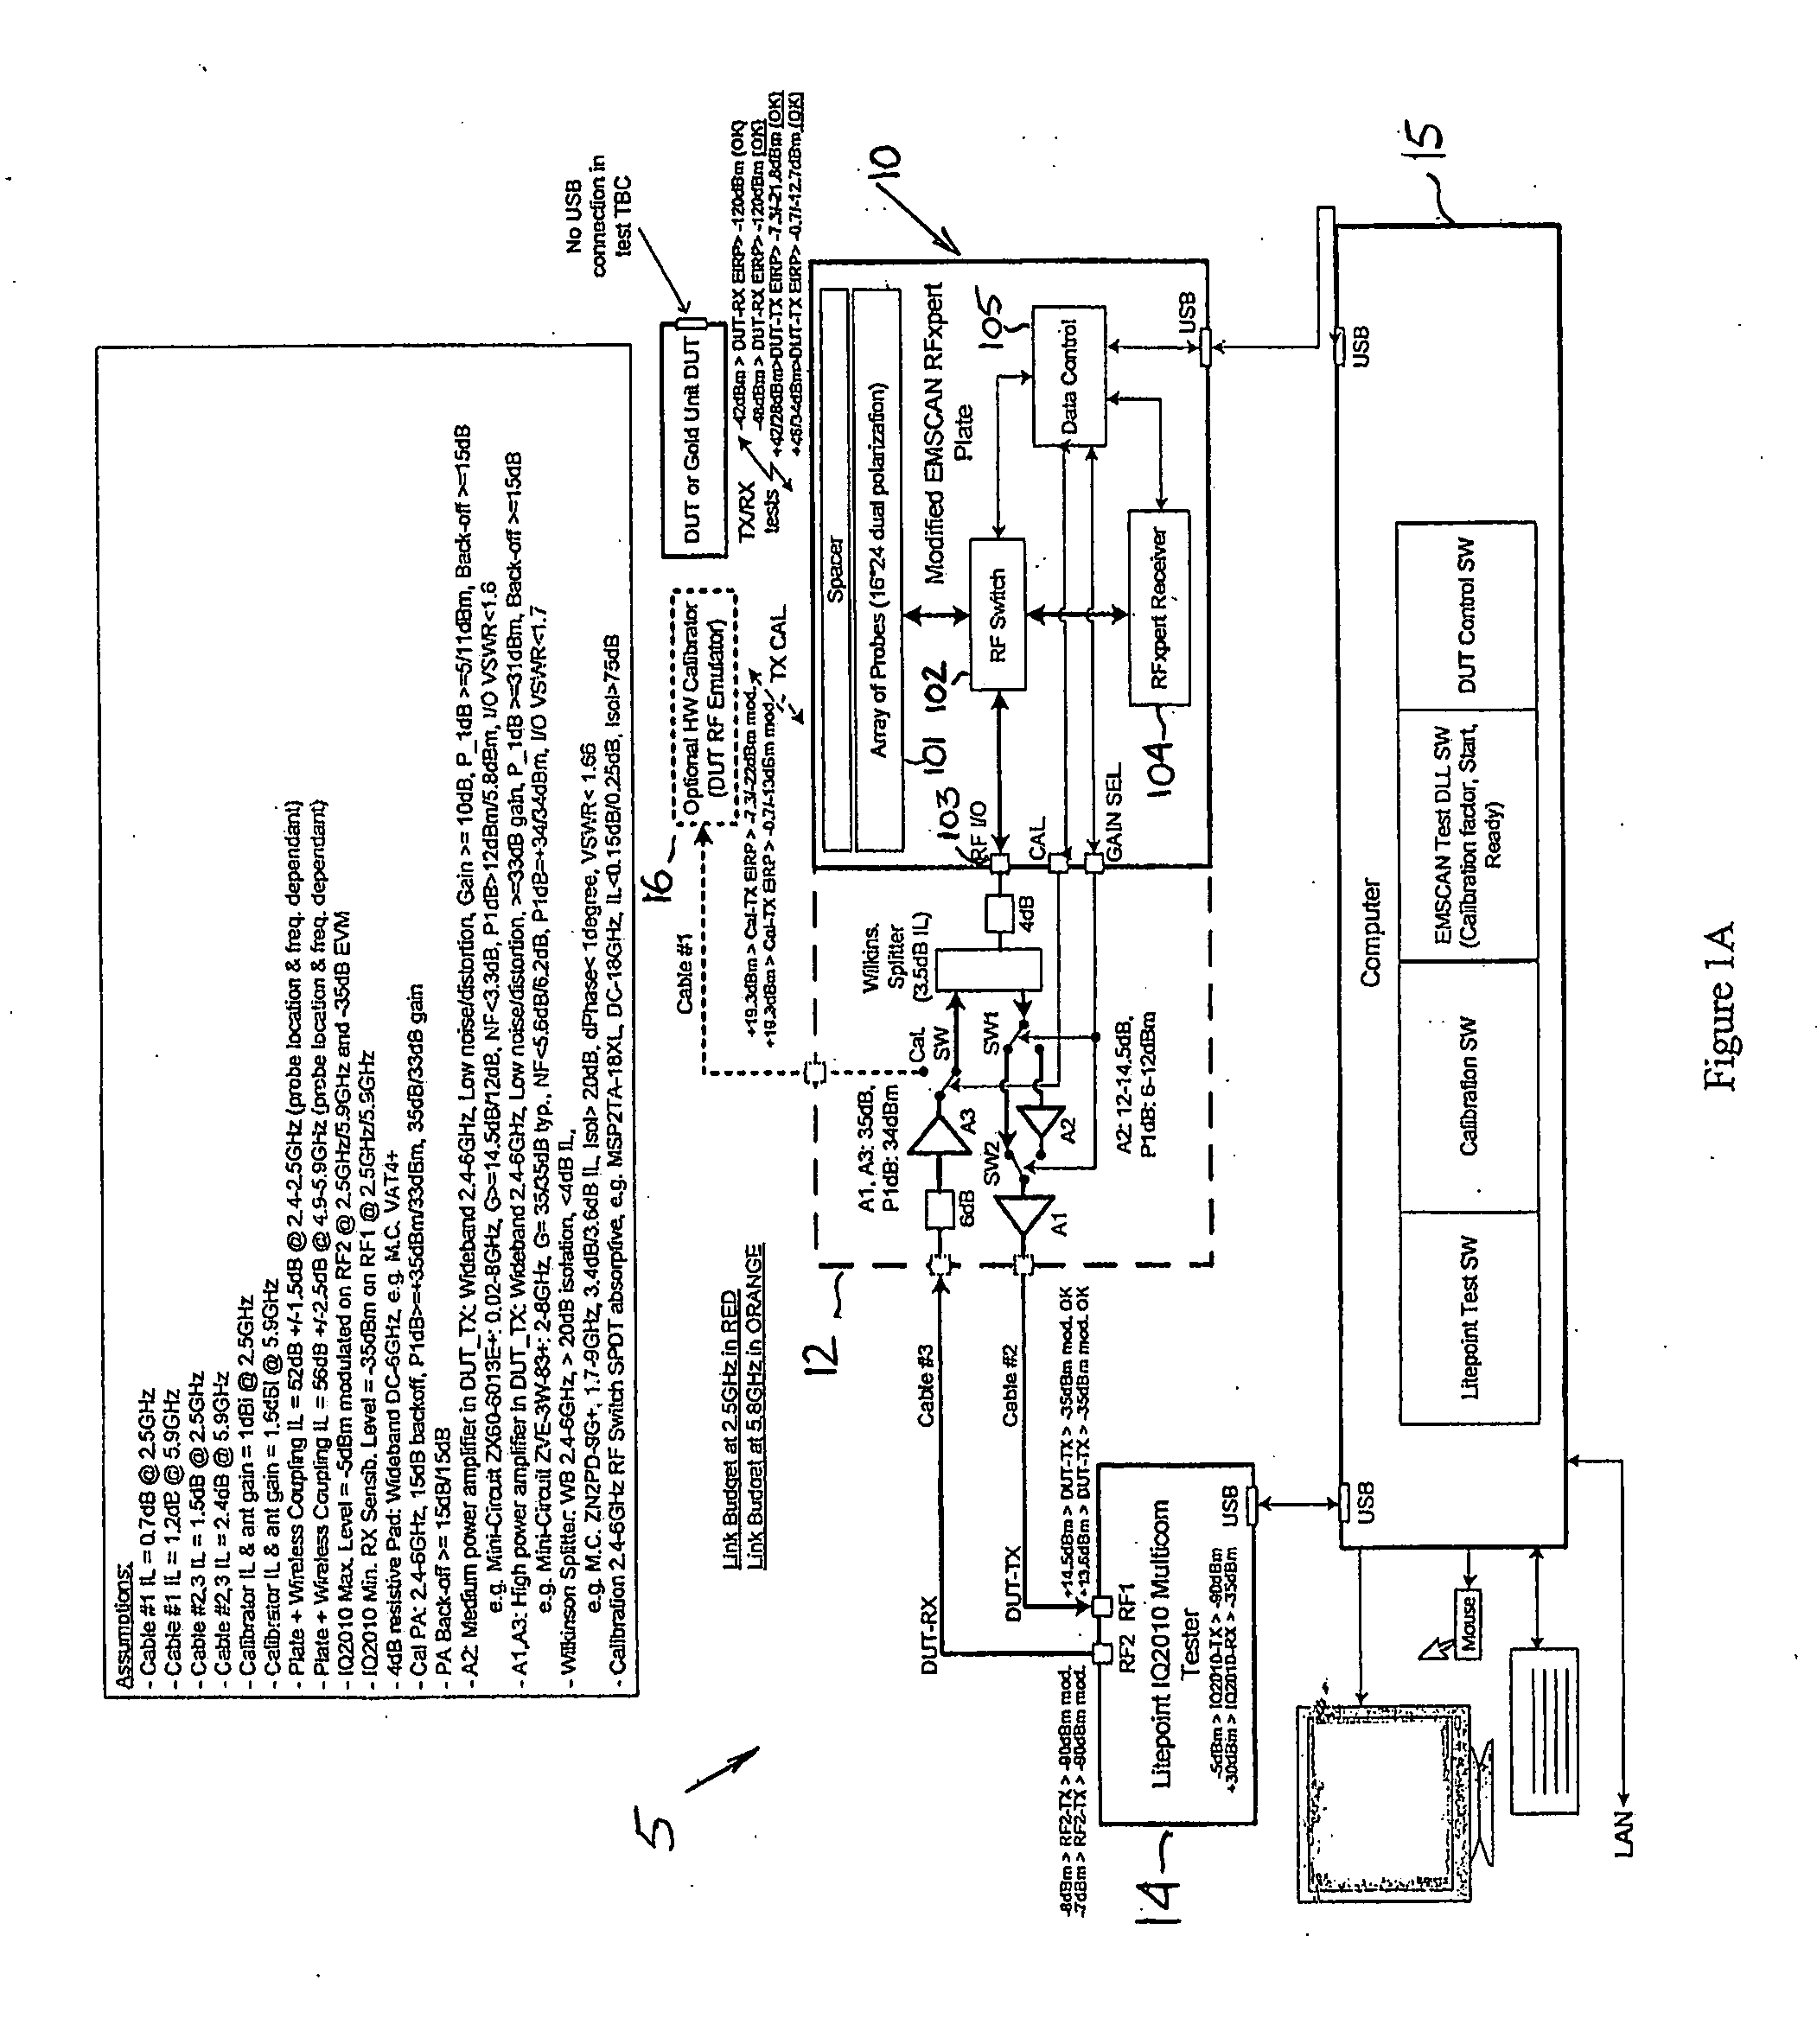 Test station for wireless devices and methods for calibration thereof